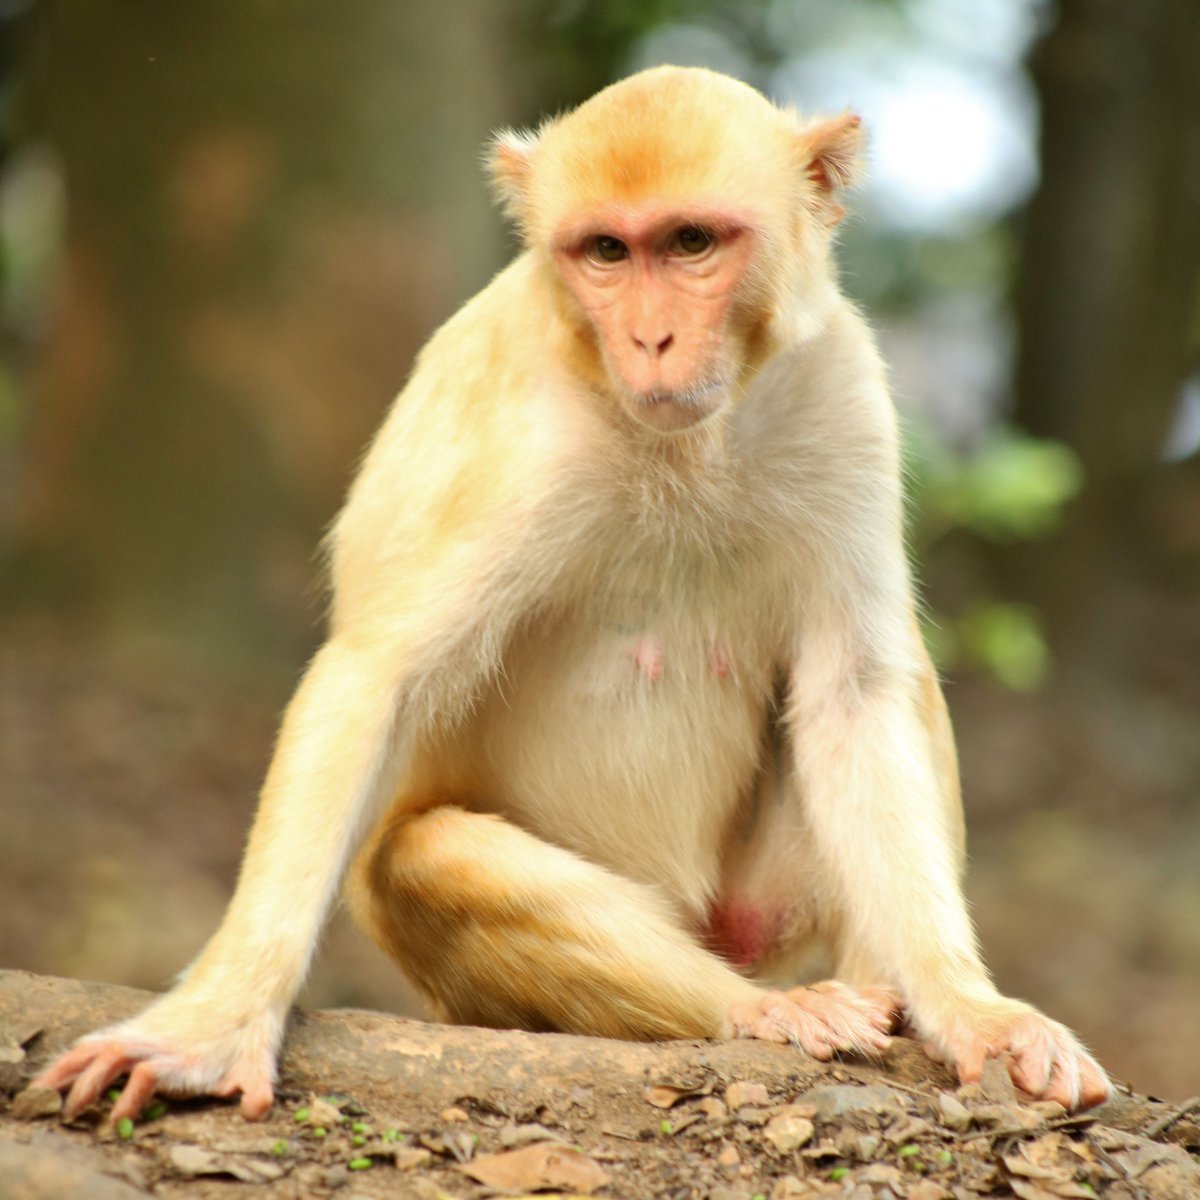 Some of the rhesus macaques at the Cayo Santiago Field Station are born with a golden or blonde pelage, in contrast to the typical brown and grey. The genetic mutation that leads to this distinct coloration is nonpathological & nonlethal. #MonkeyMonday